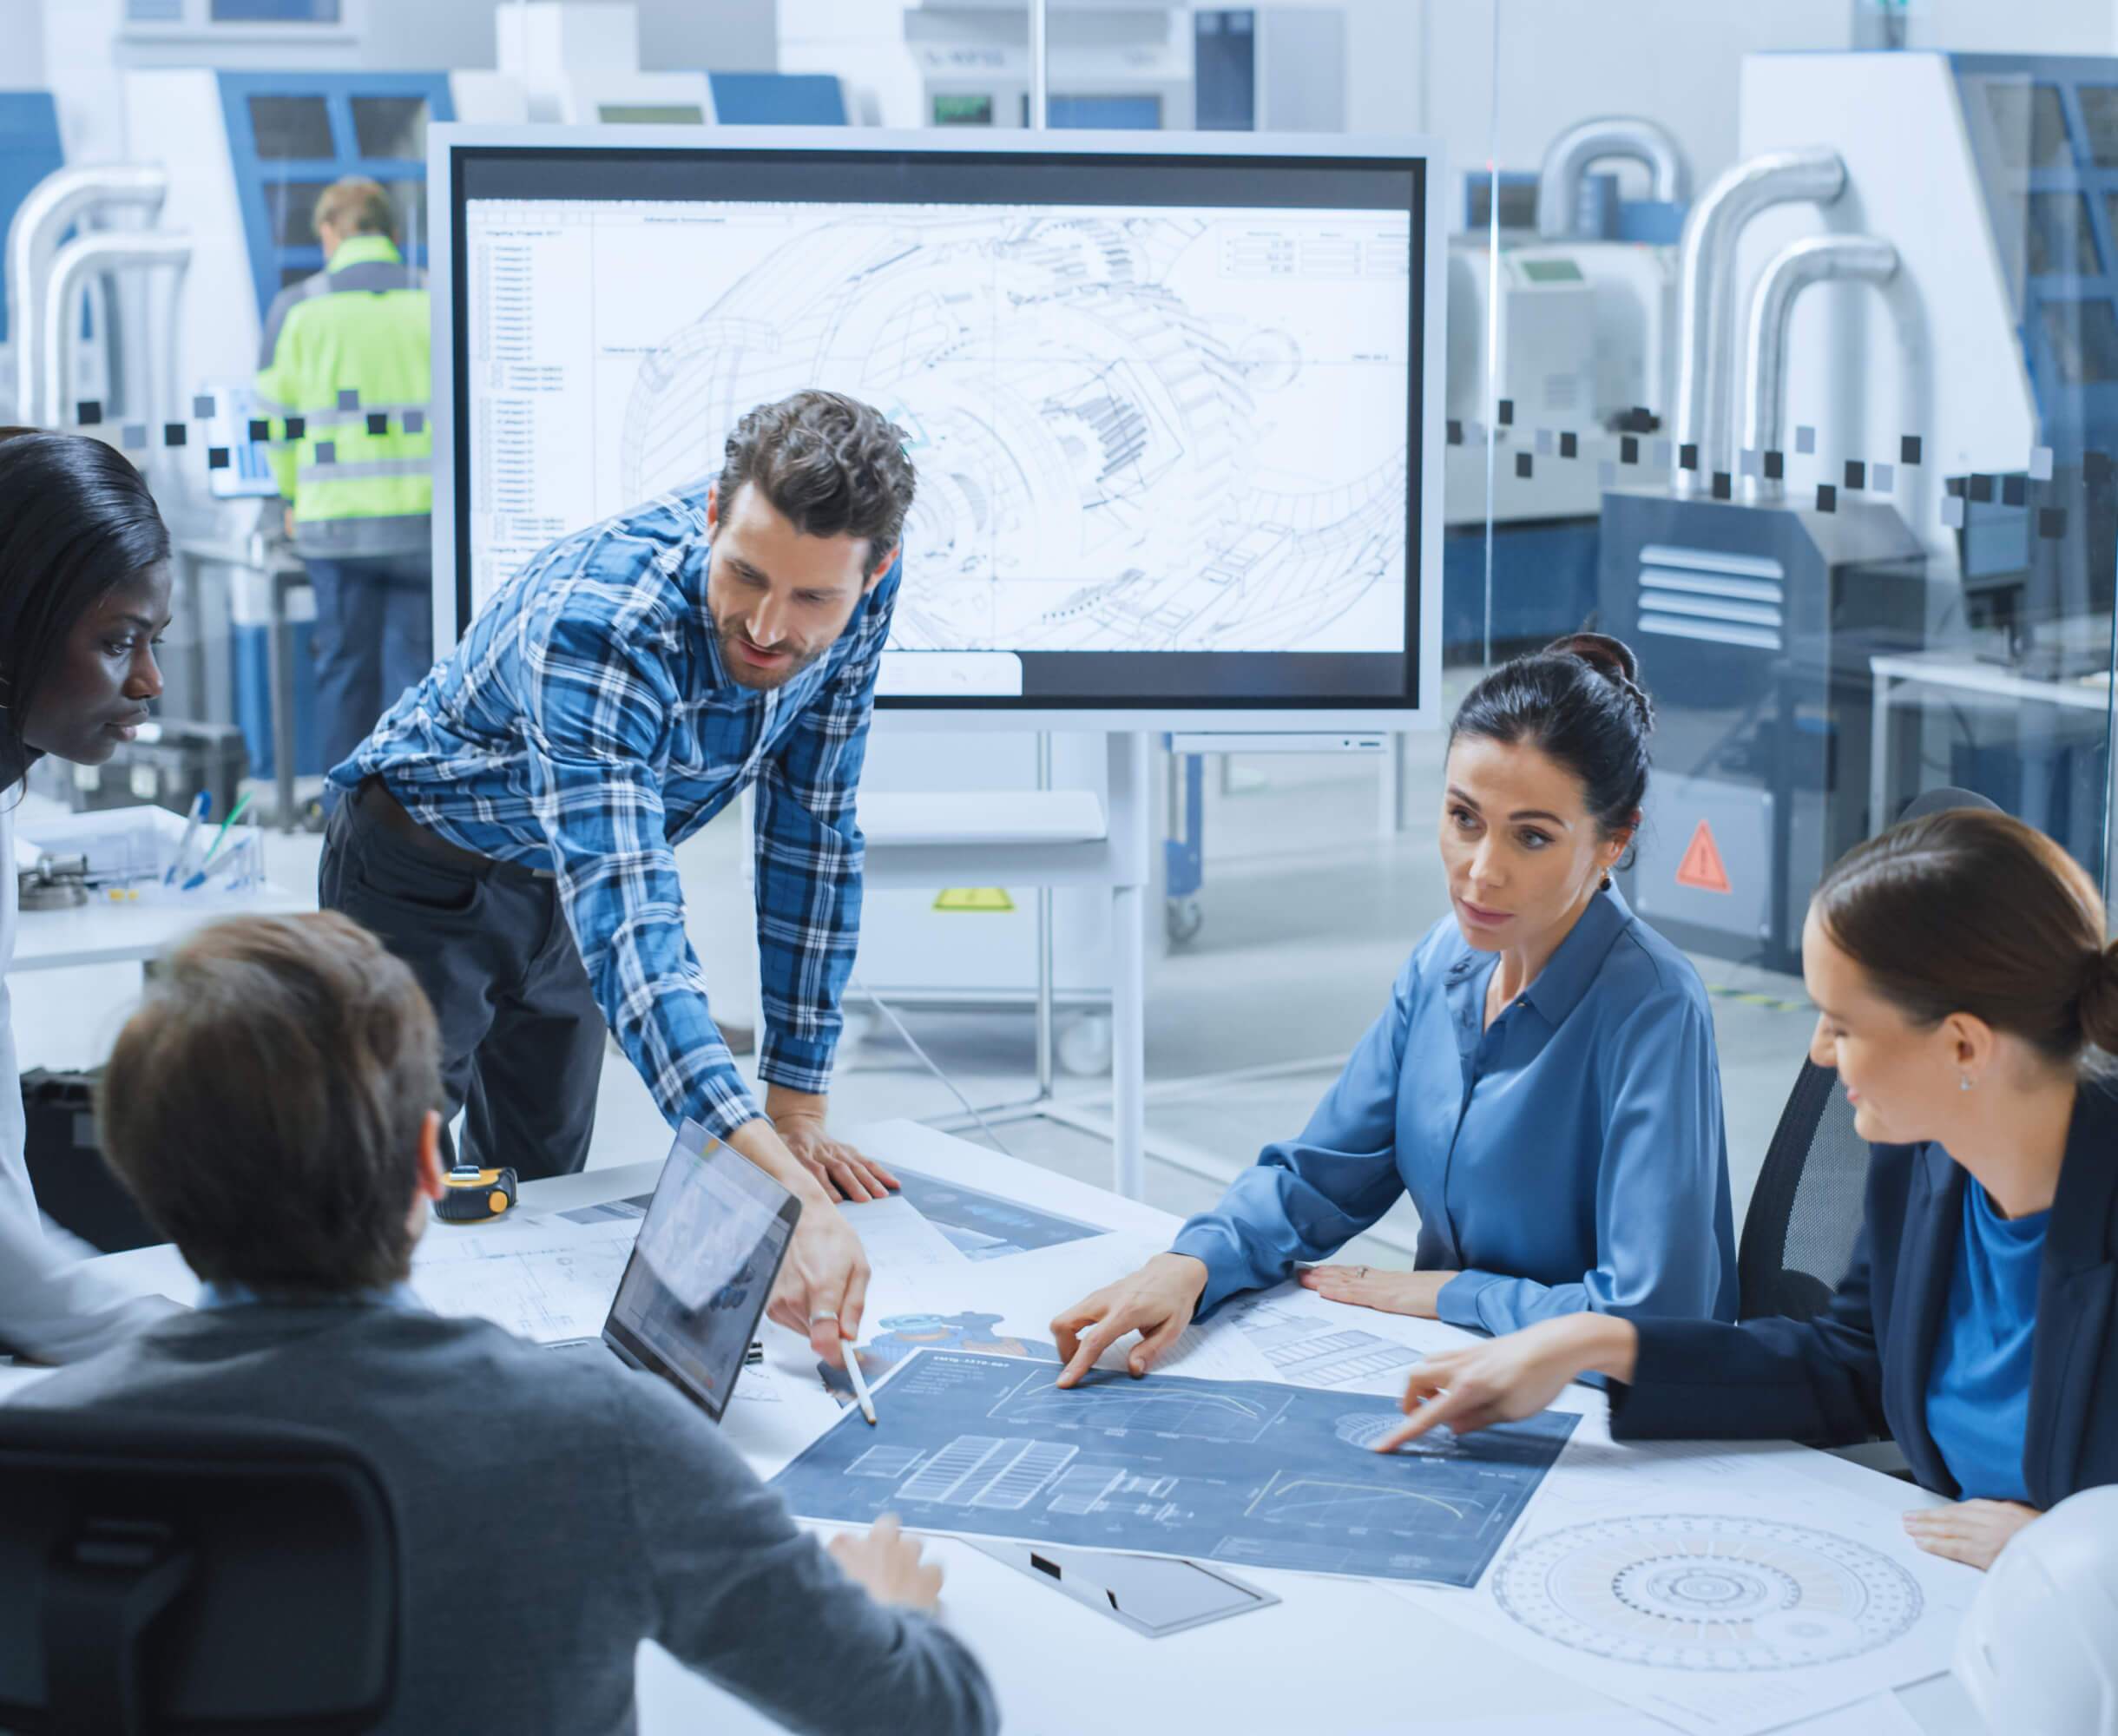 A diverse group of engineers, both male and female, discussing over blueprints in a high-tech manufacturing facility with large digital displays.